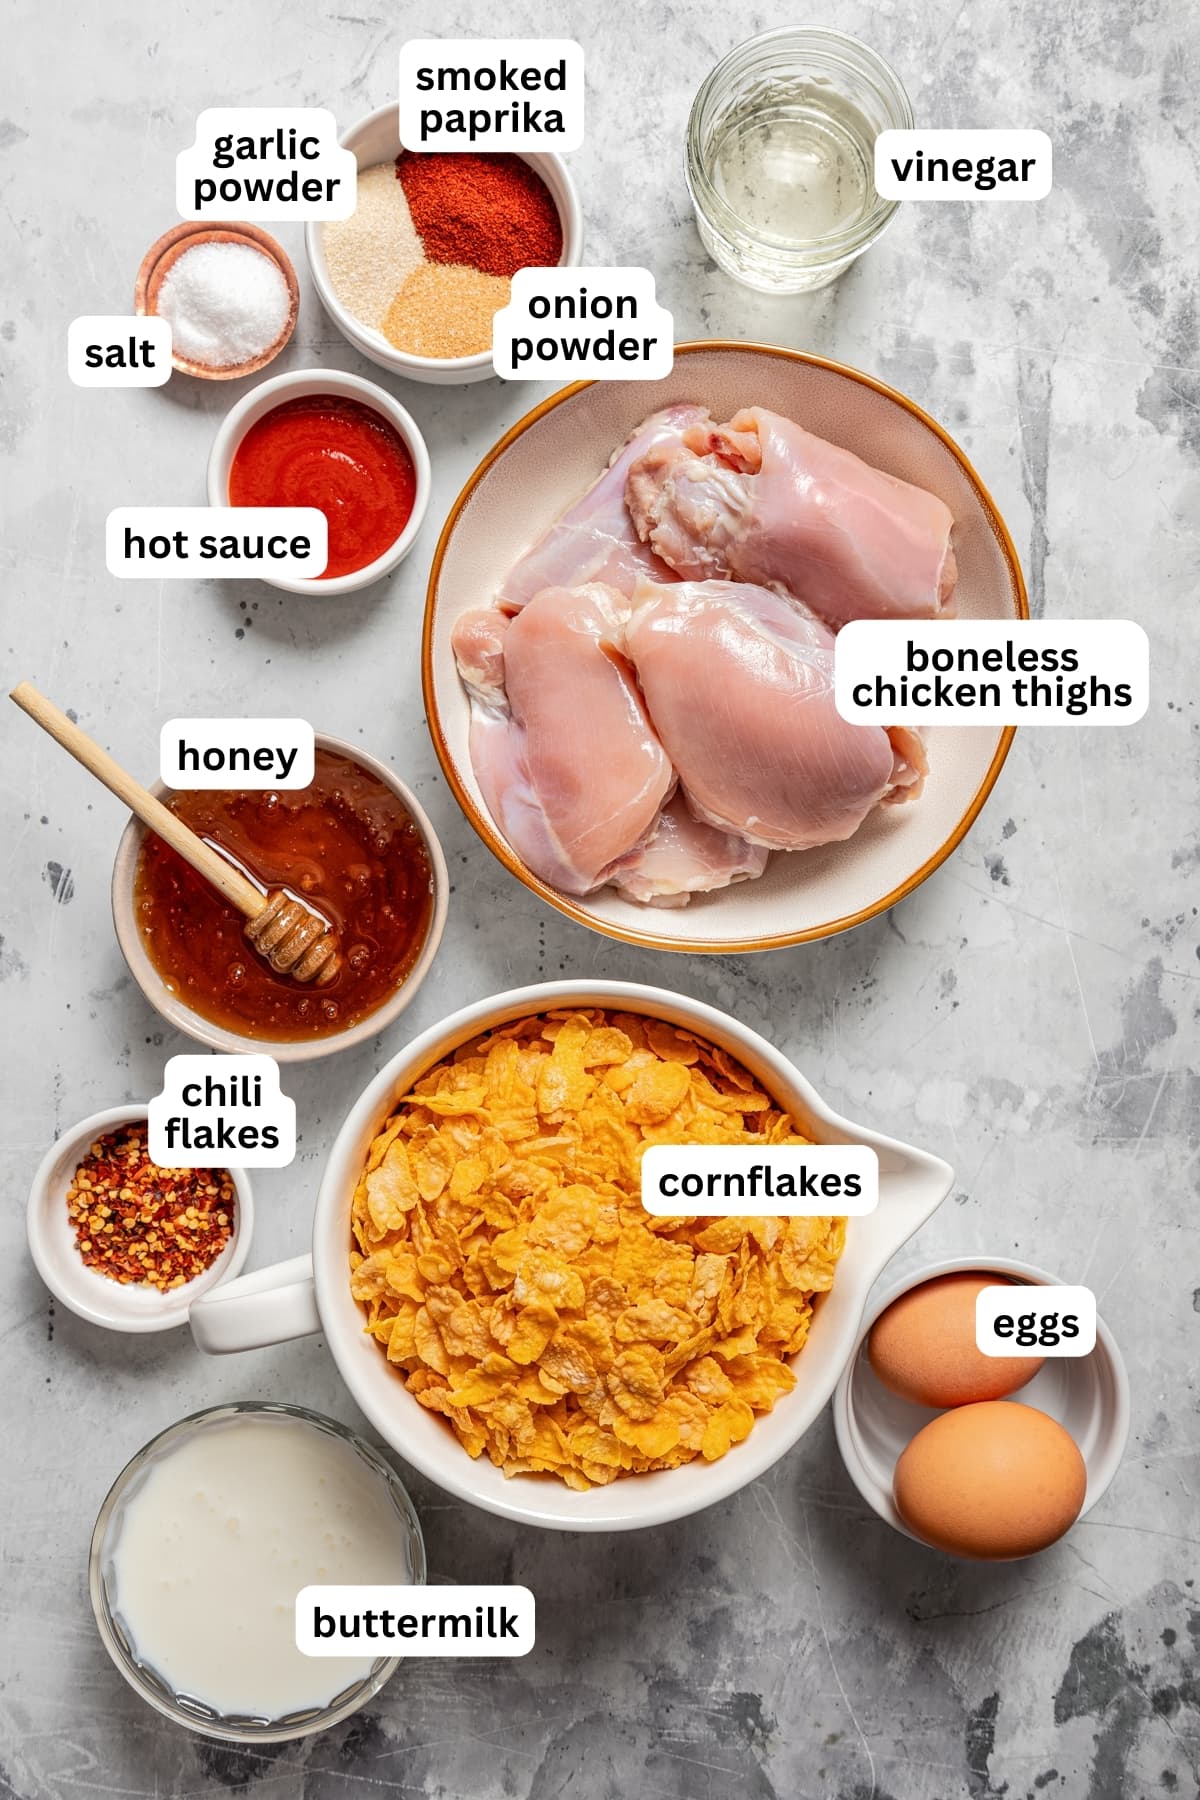 Image of all the ingredients for Hot Honey Chicken.